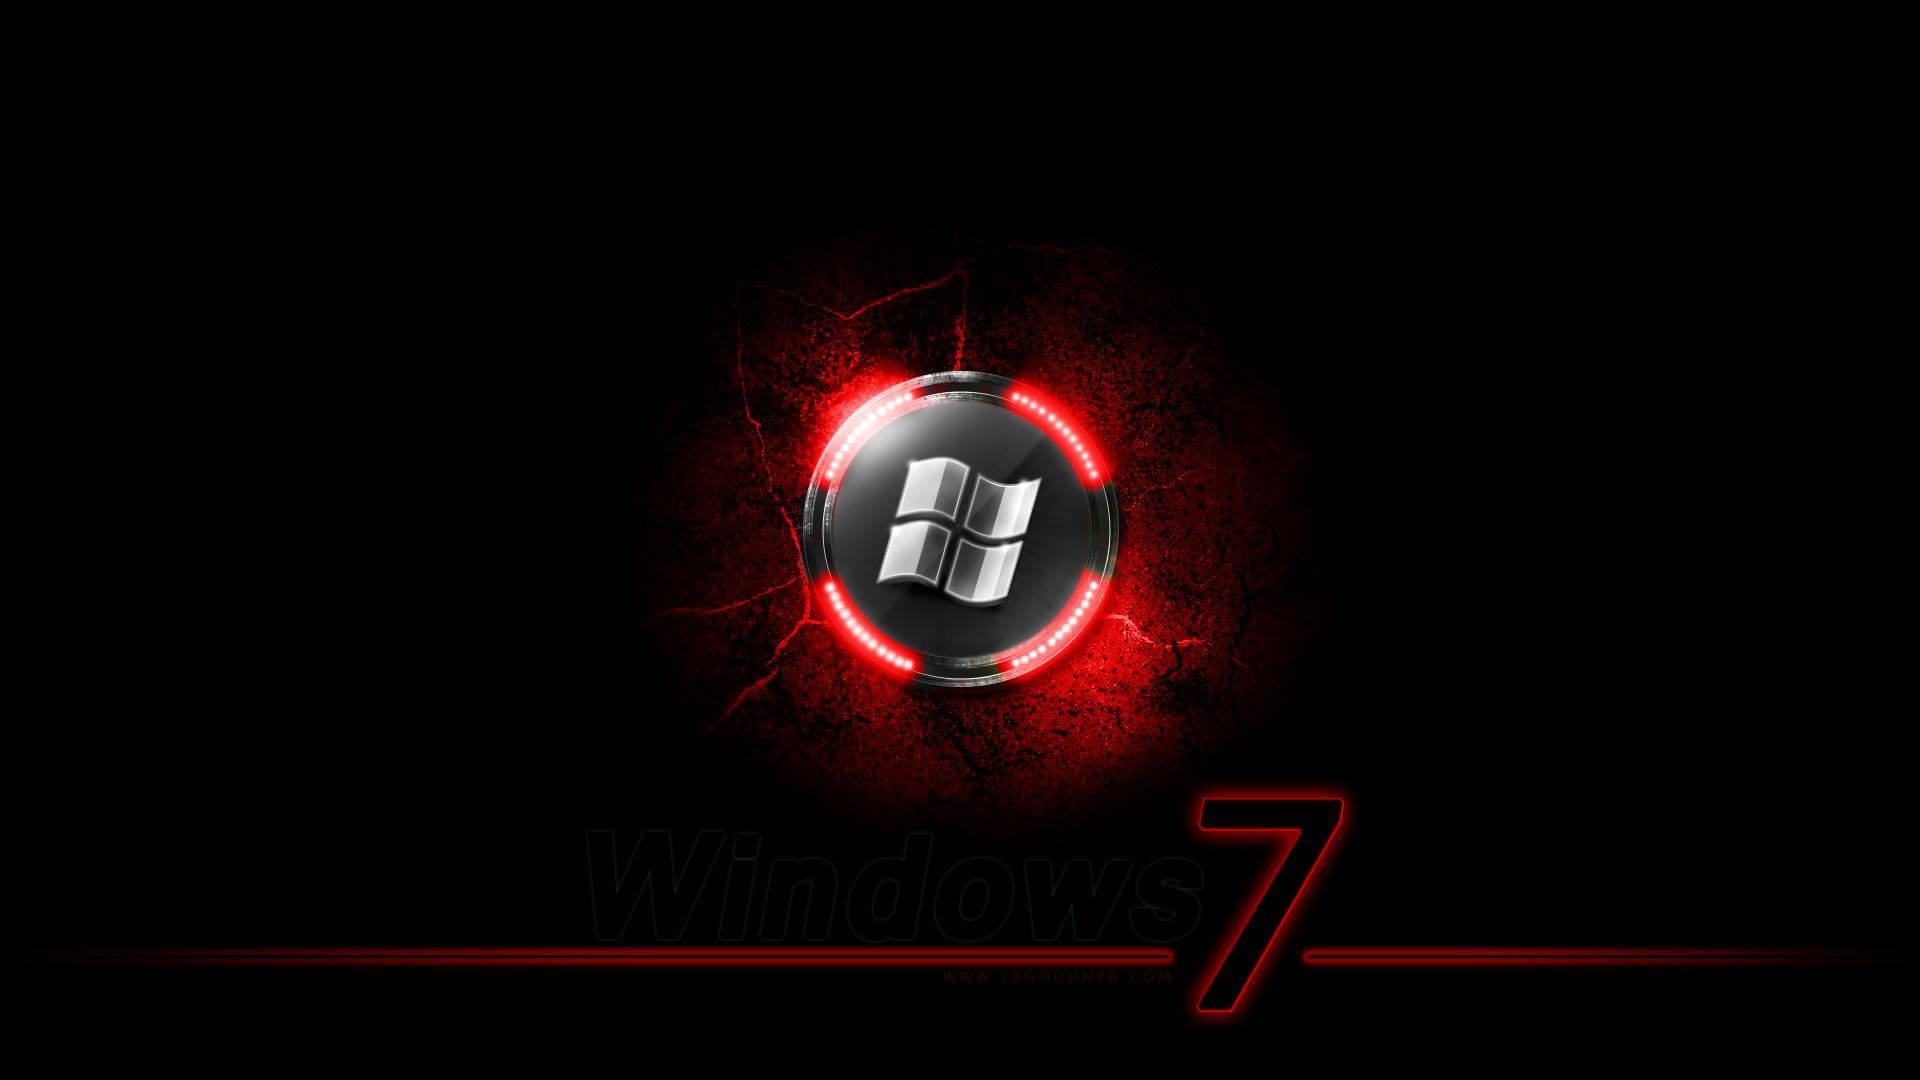 Windows 7 HD Wallpaper Windows 7 Images Free Cool Backgrounds